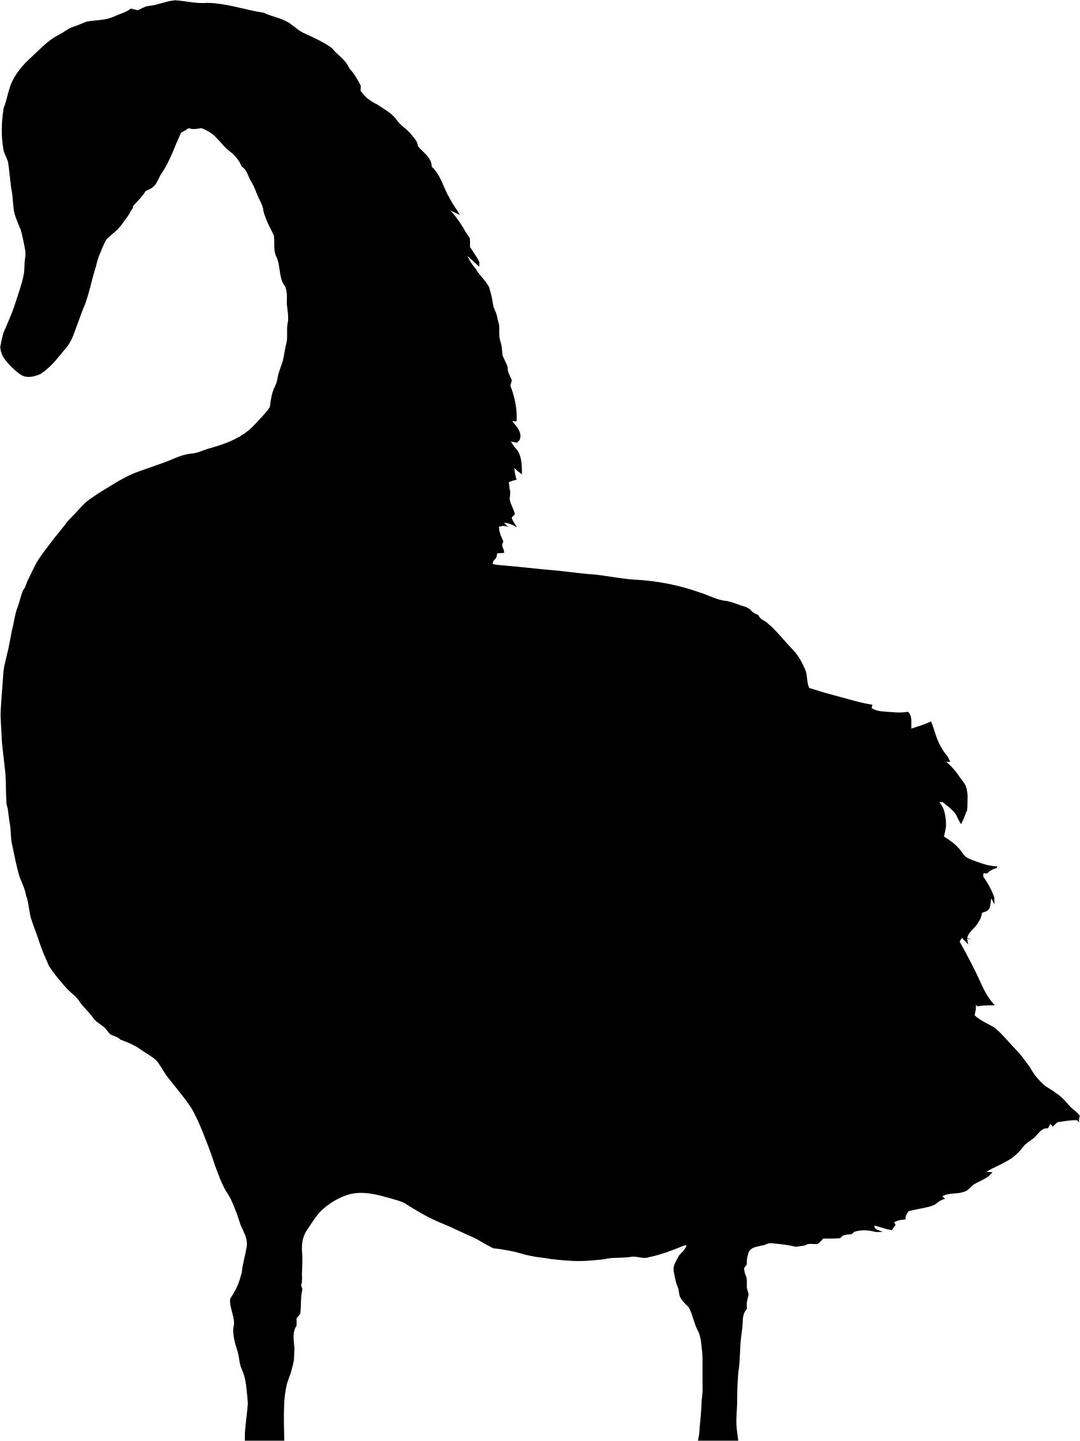 Swan Silhouette 4 png transparent